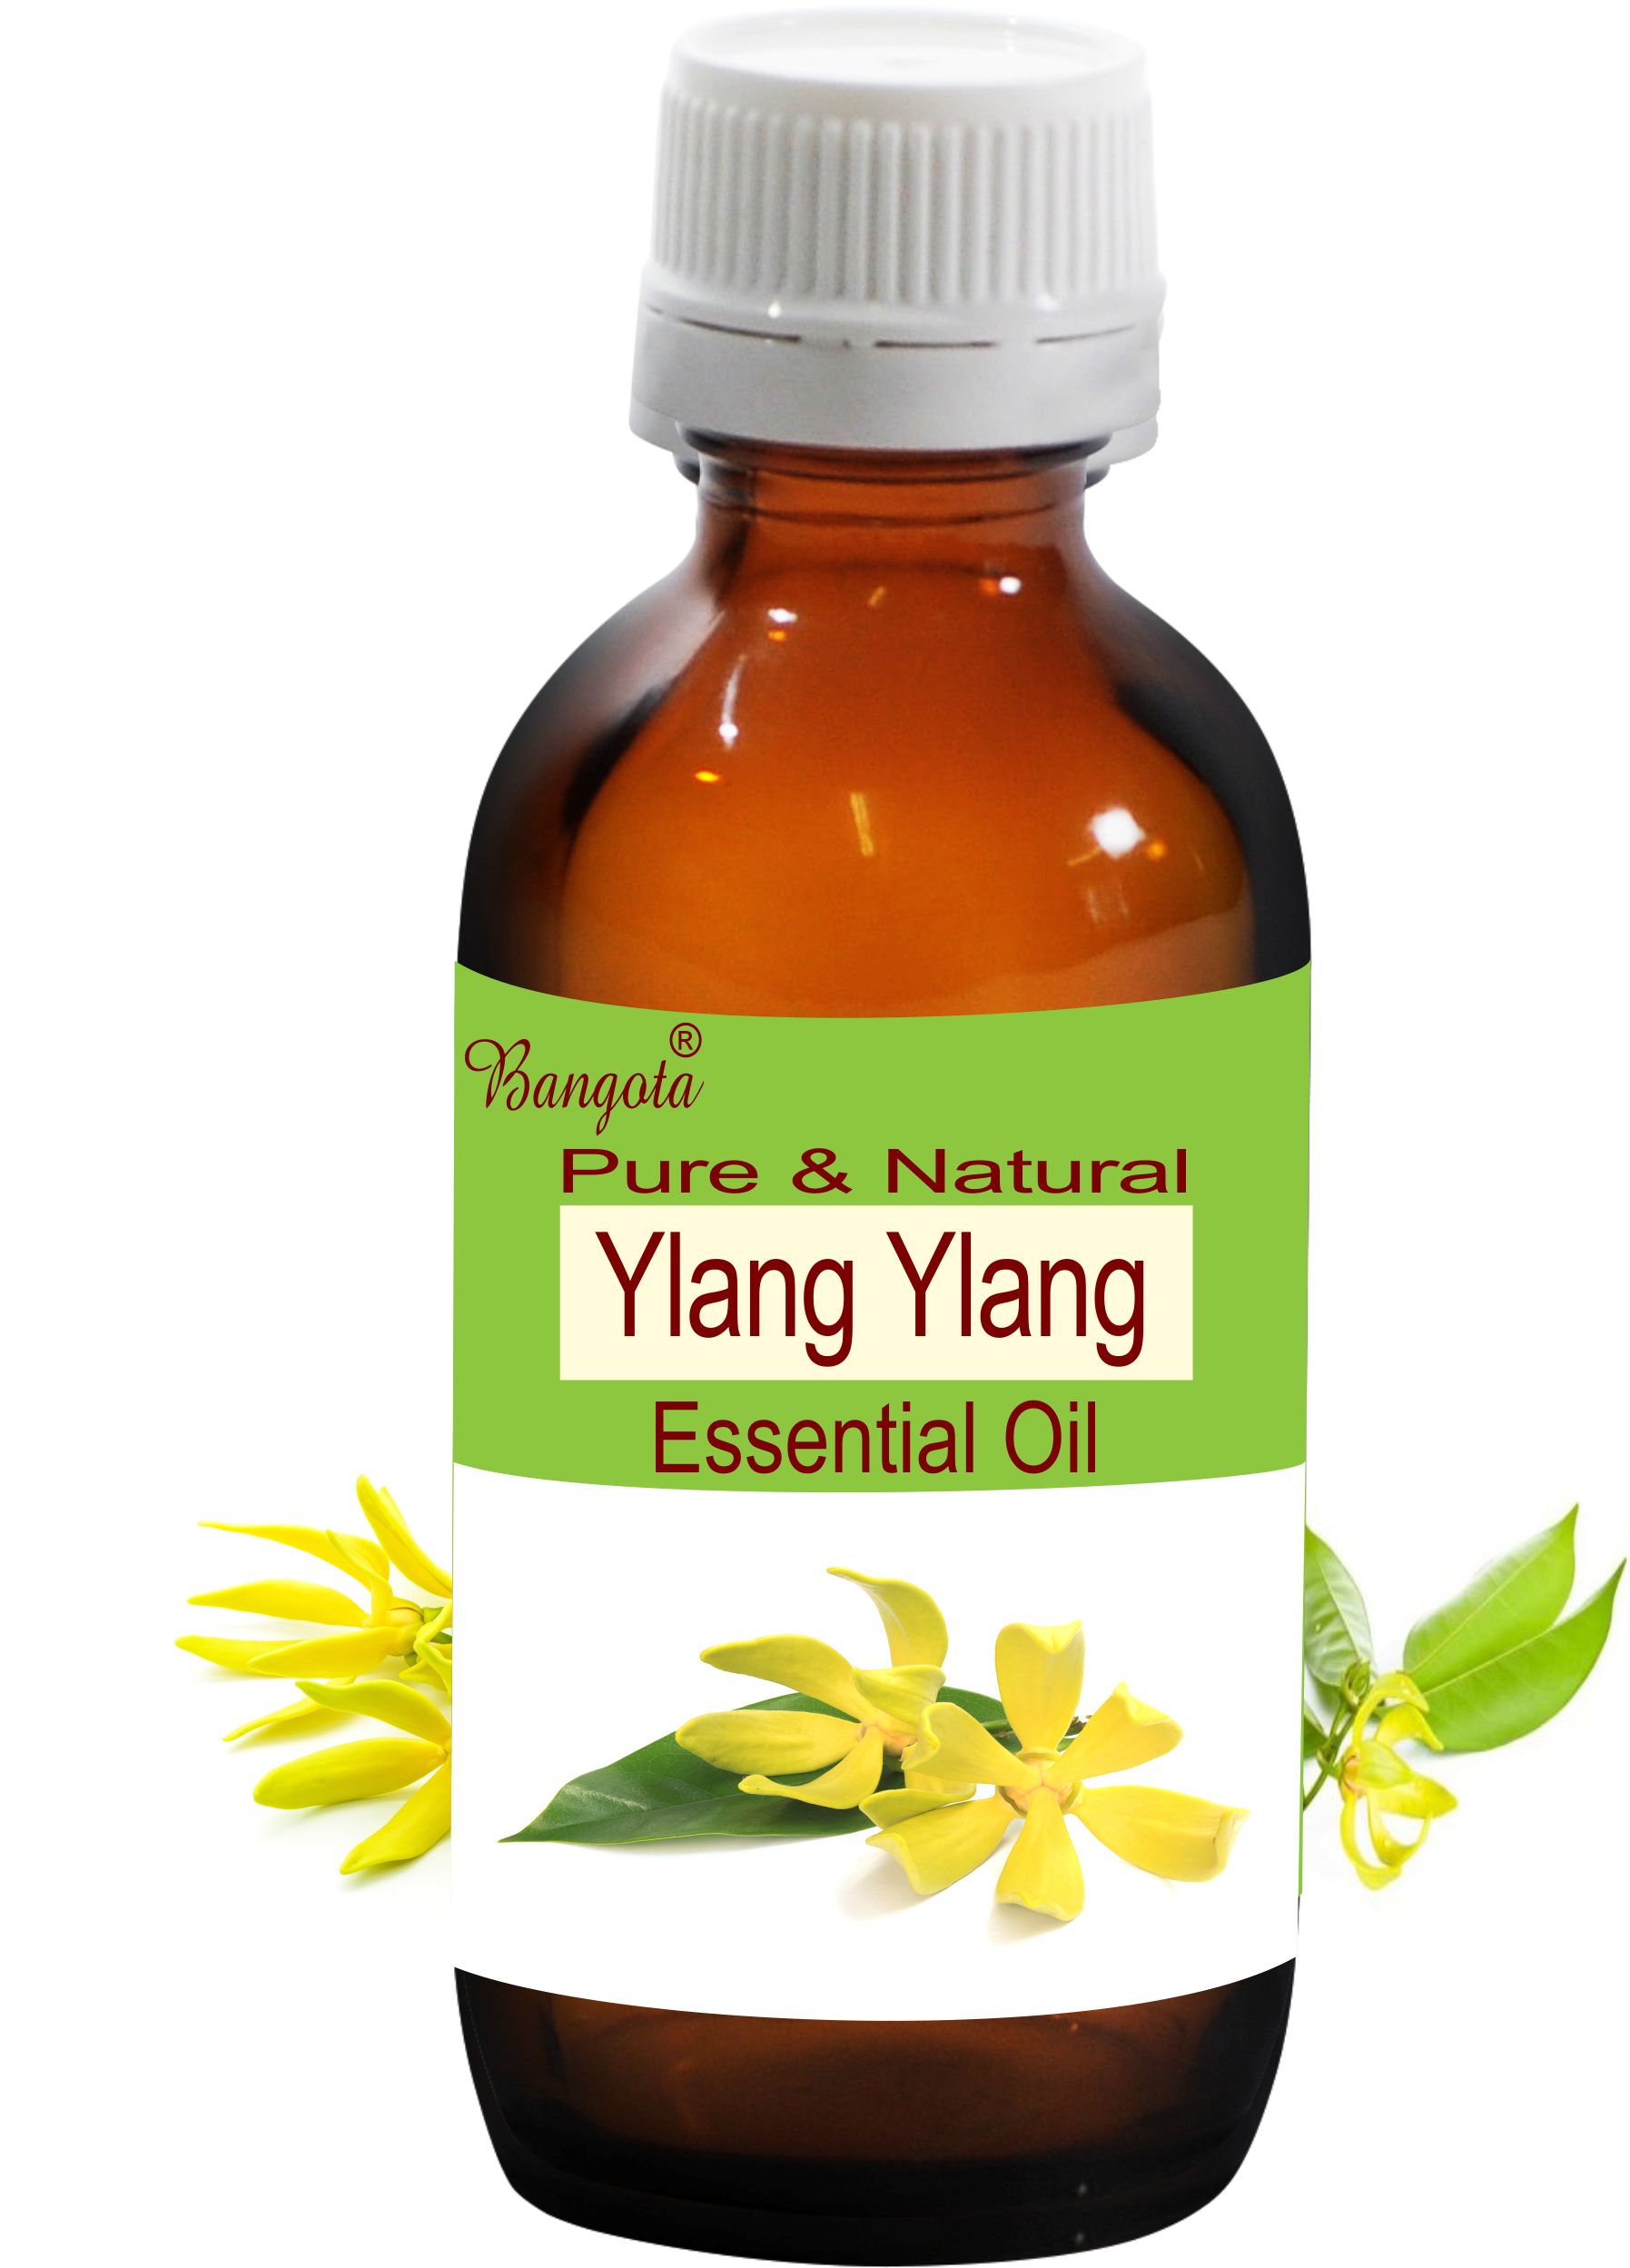 Buy Ylang Ylang Oil Pure Natural Essential Oil 50 Ml Online ₹937 From Shopclues